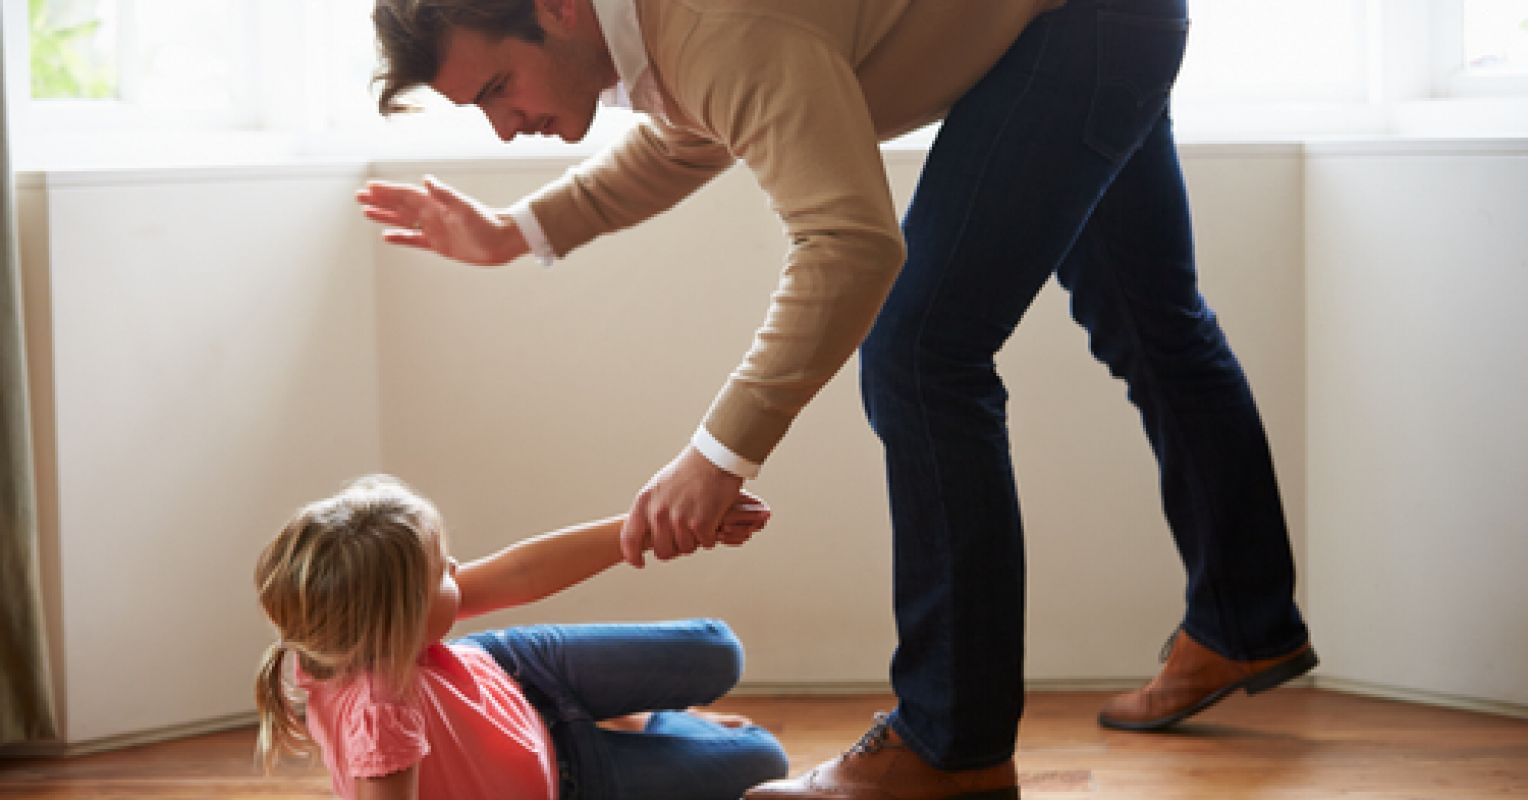 Why Some Parents Spank Their Kids